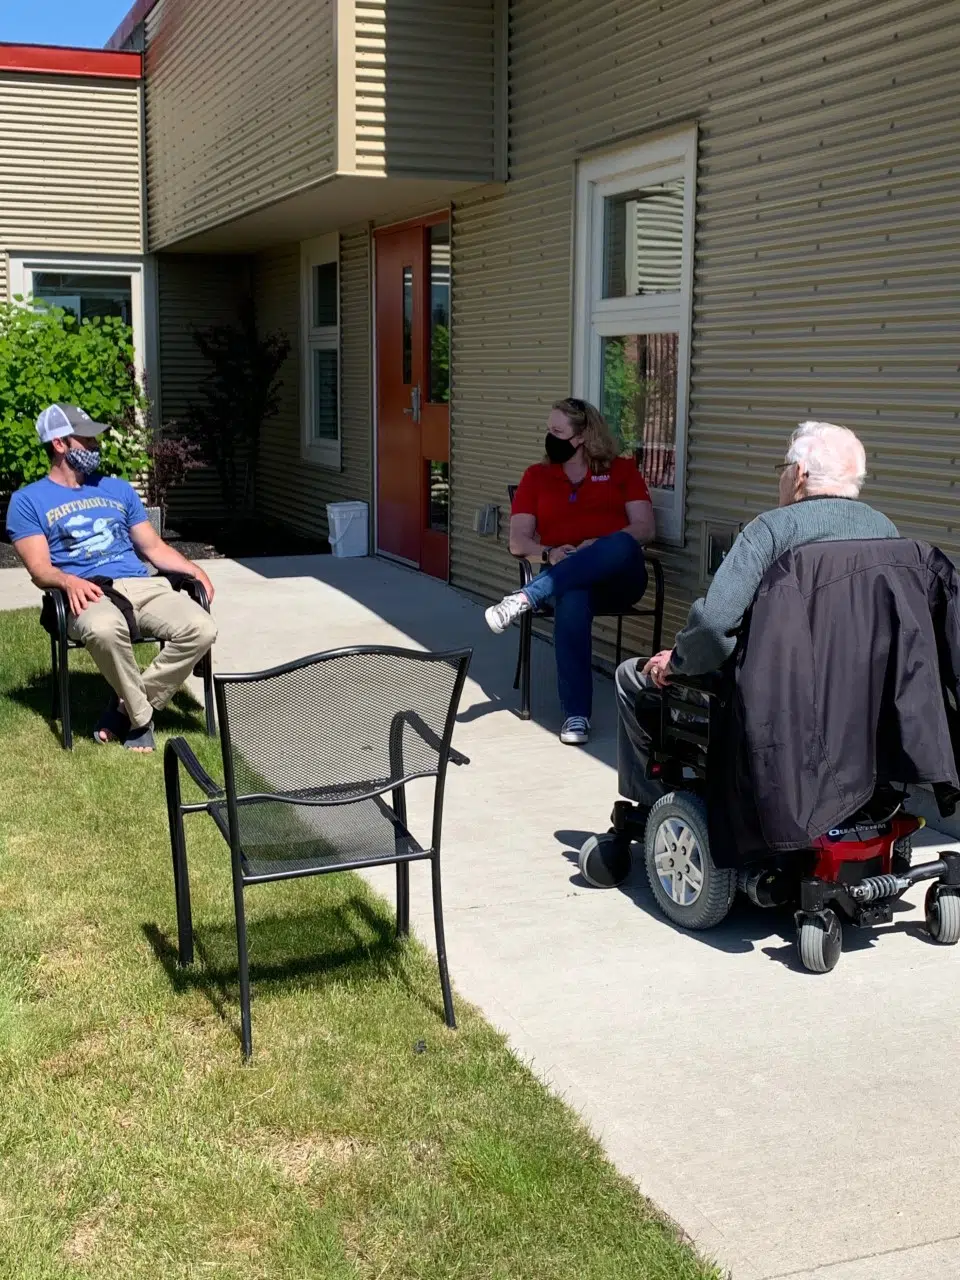 Seniors And Loved Ones Reunite In Outside Visits